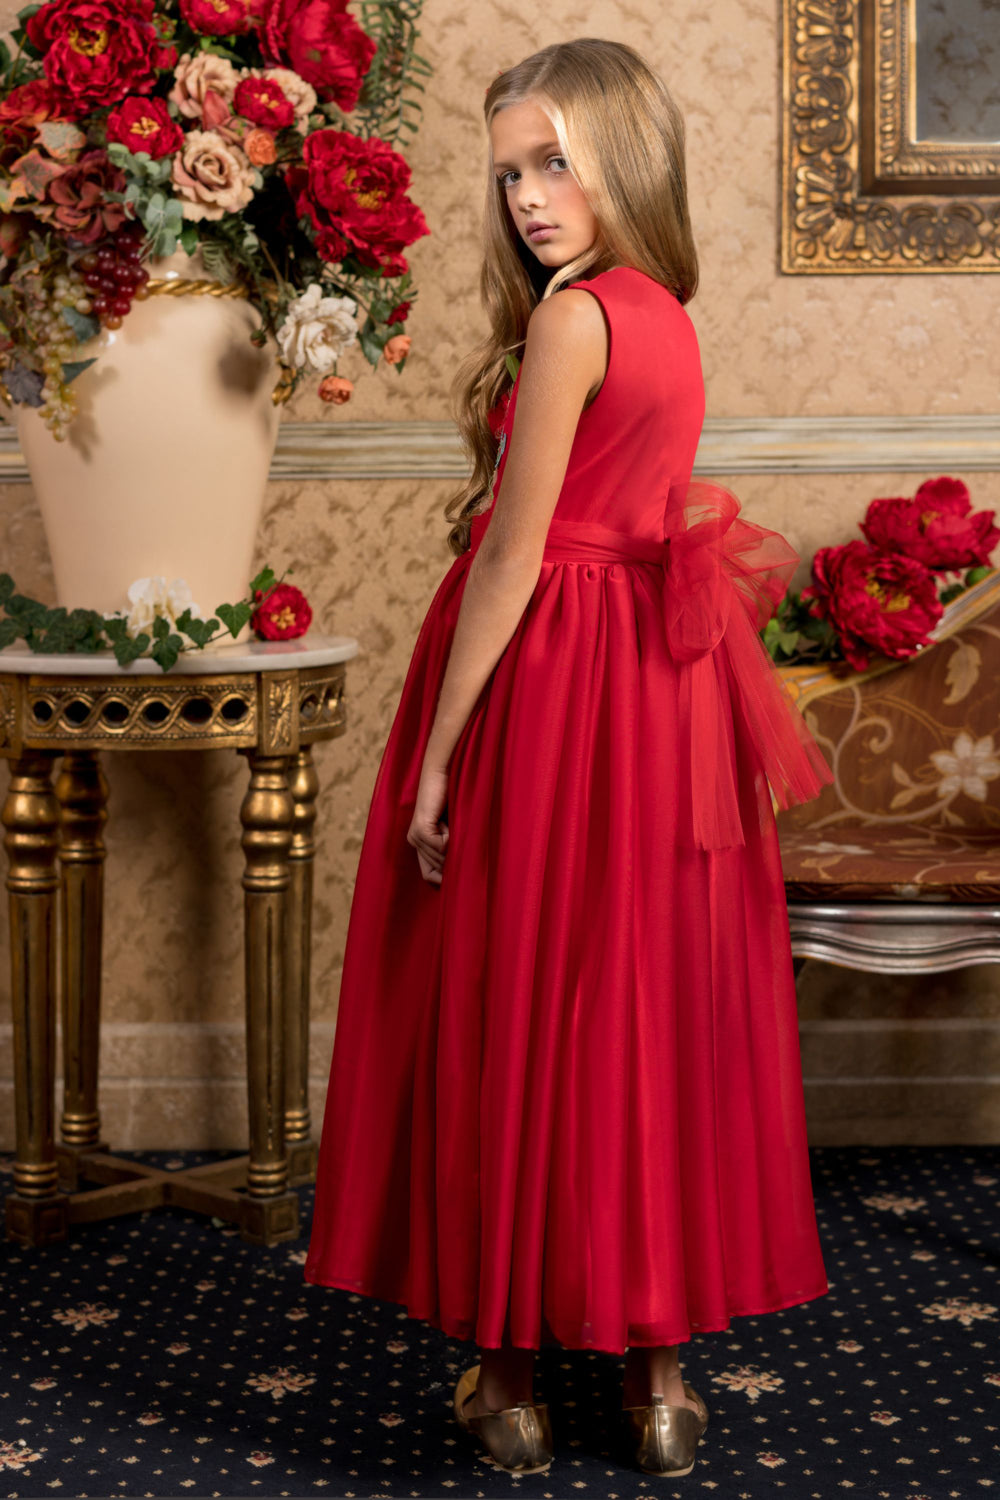 Red tulle dress with handmade embroidery and bow on the waist